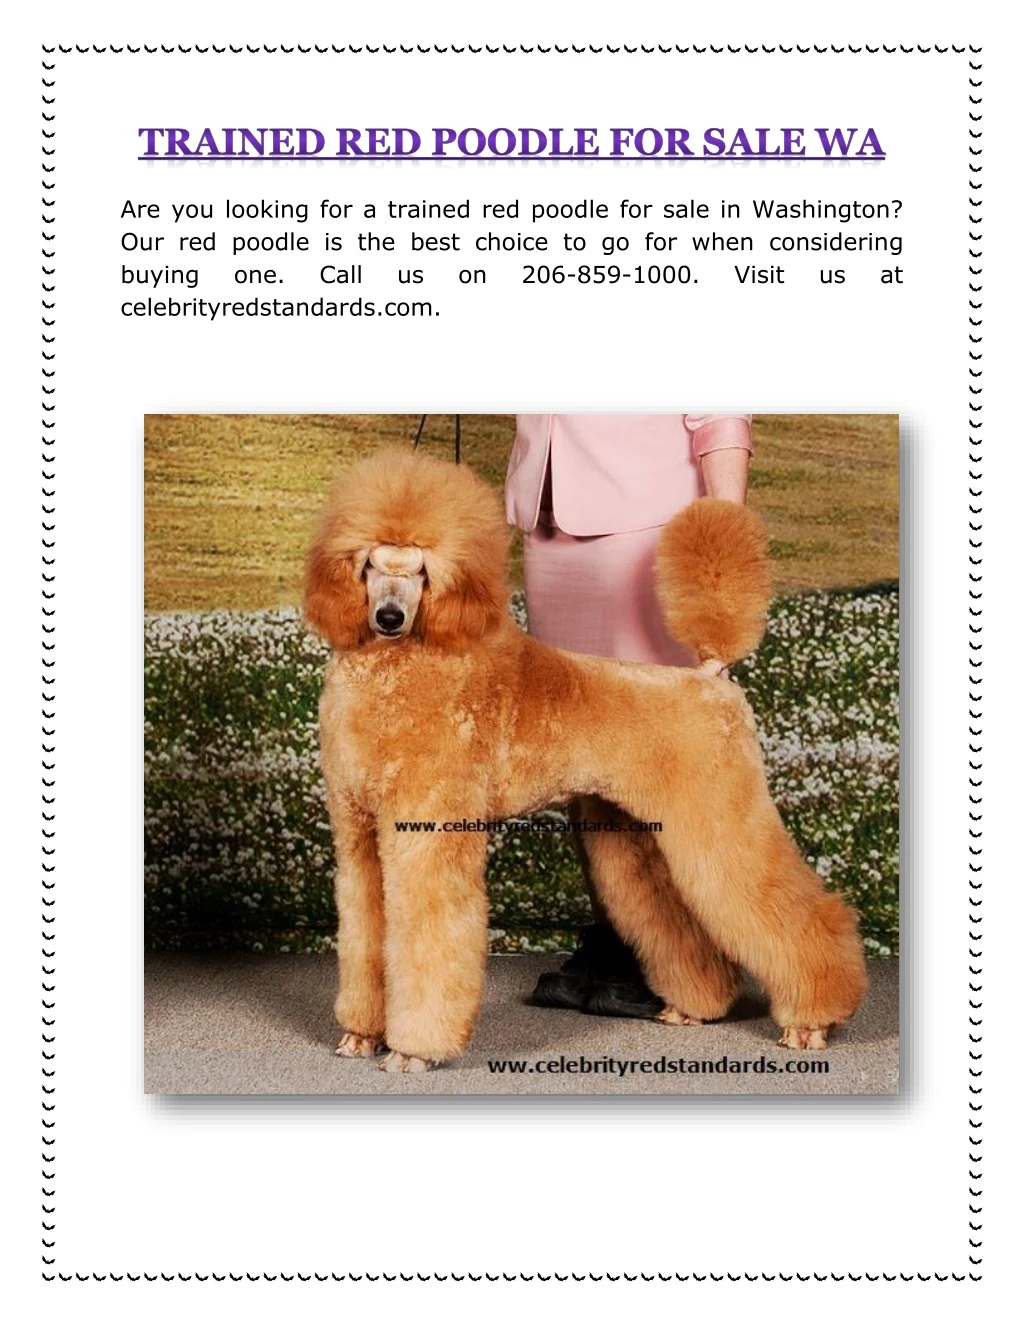 are you looking for a trained red poodle for sale